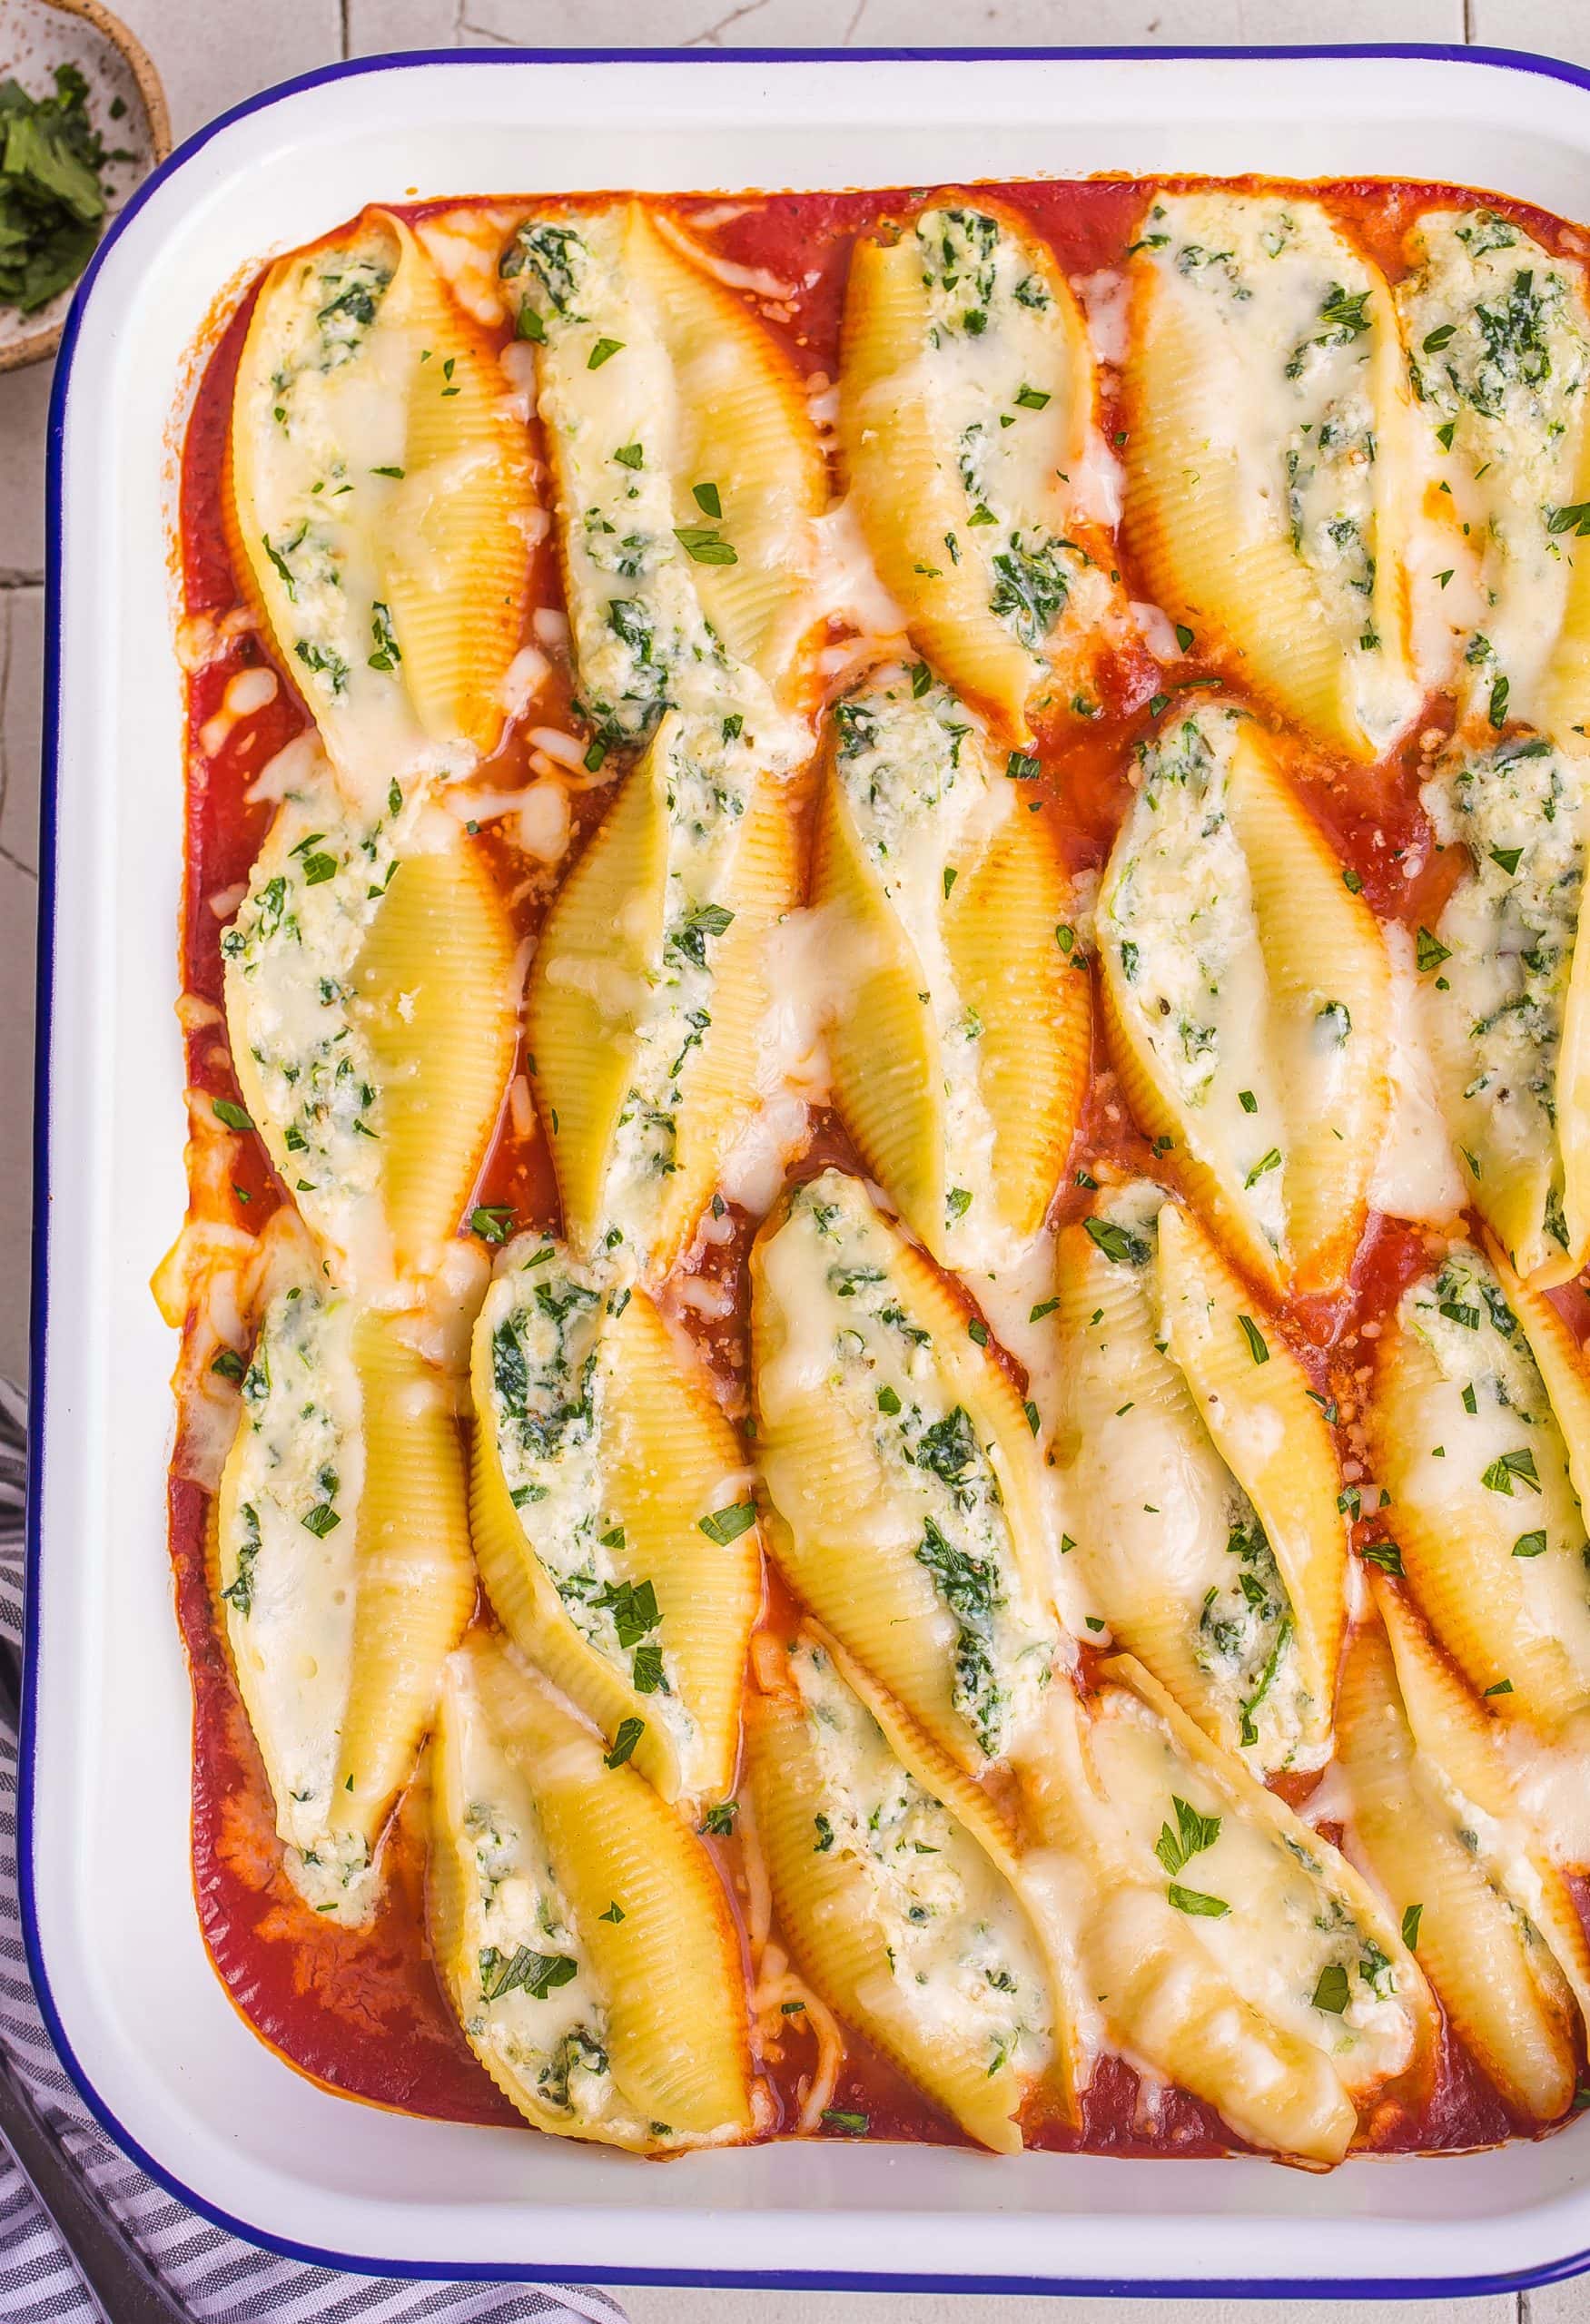 Ricotta and Spinach Stuffed Shells in a casserole dish.